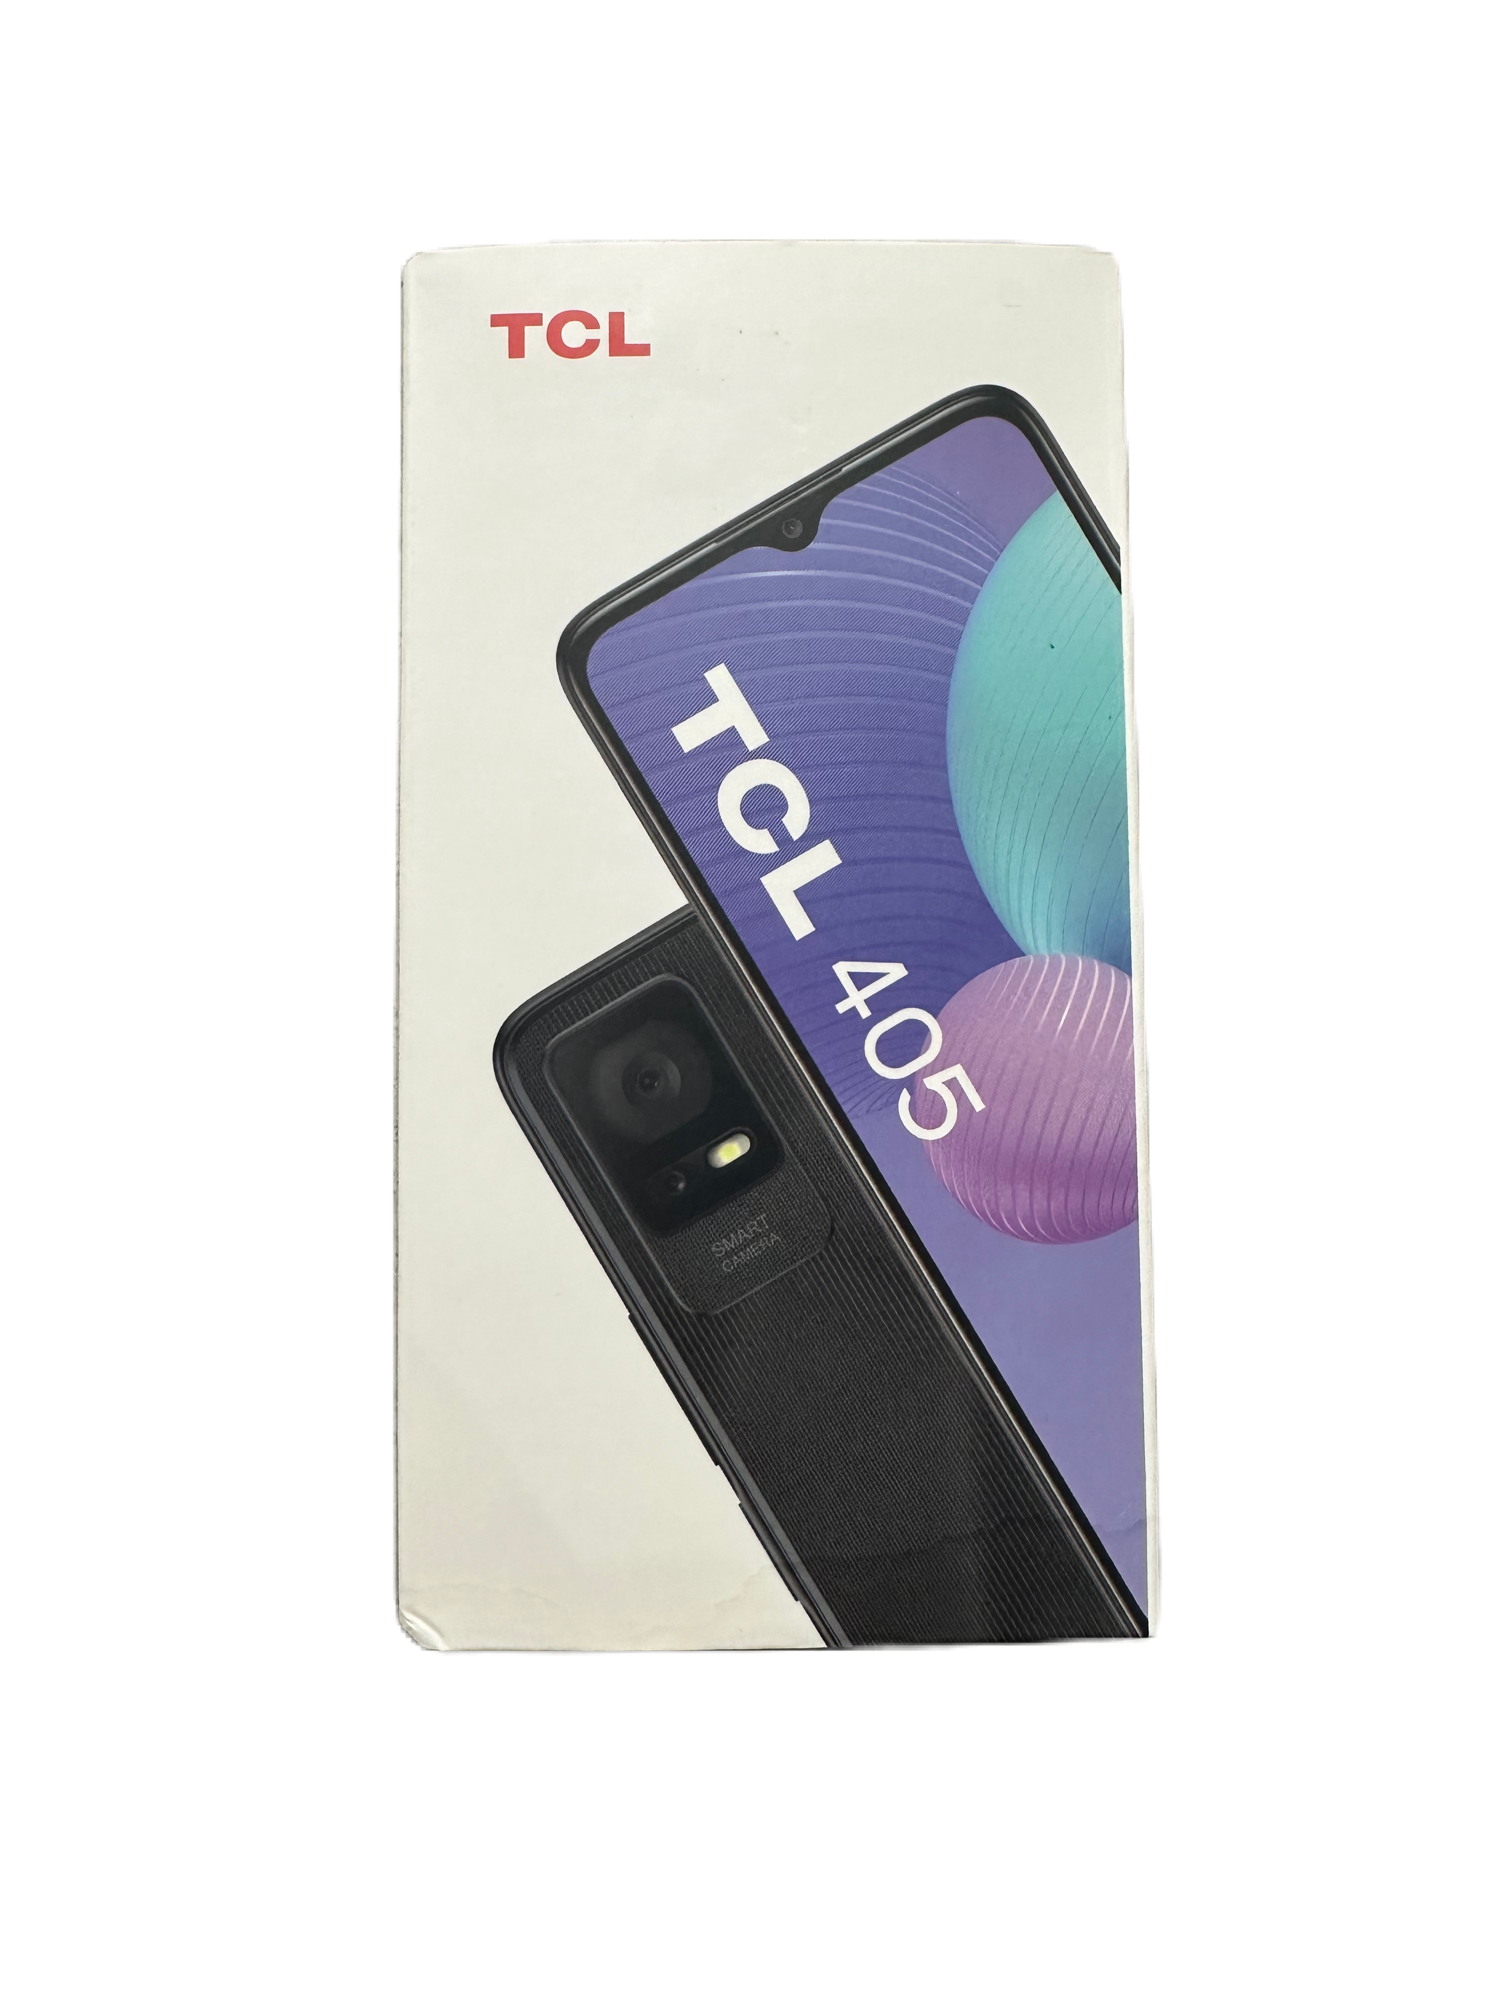 TCL 405 - As New, Android Handset